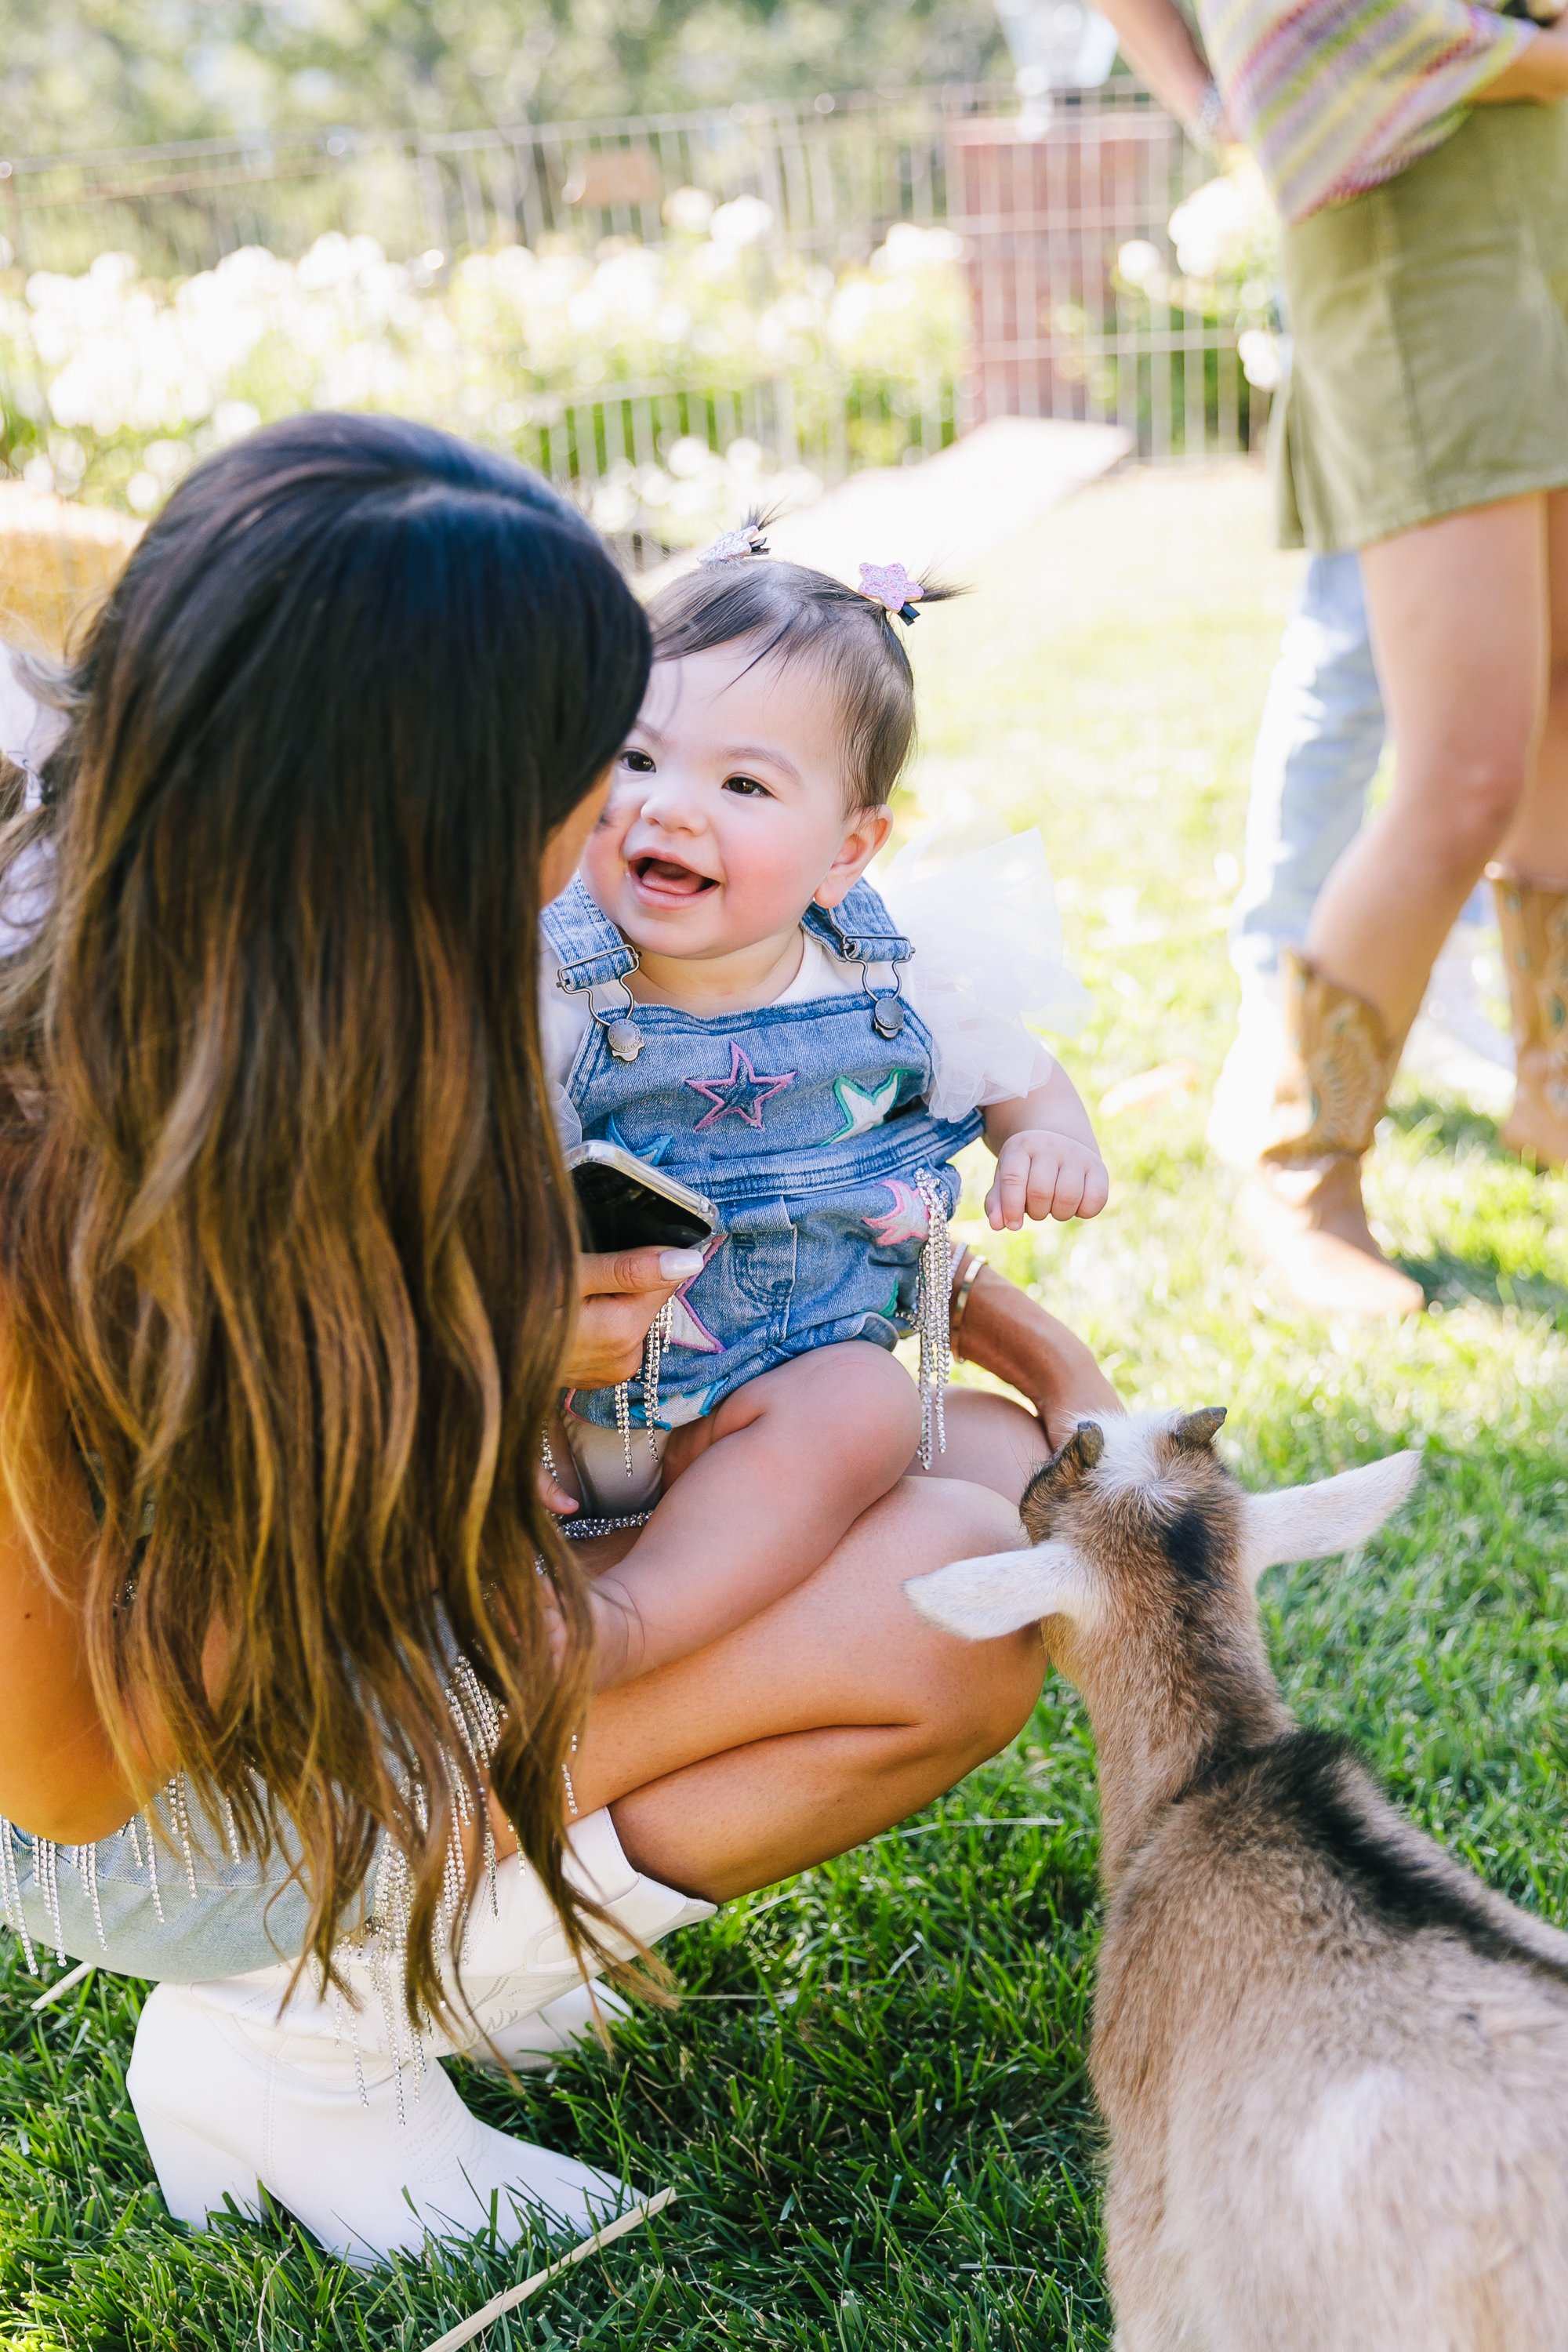 Los_Angeles_Party_Photographer_Luxury_Event_First_Birthday_Baby_Sherwood_Beverly_Hills_Cowboy_Disco_Theme_Girl_Child_Family_Photography-0978.jpg